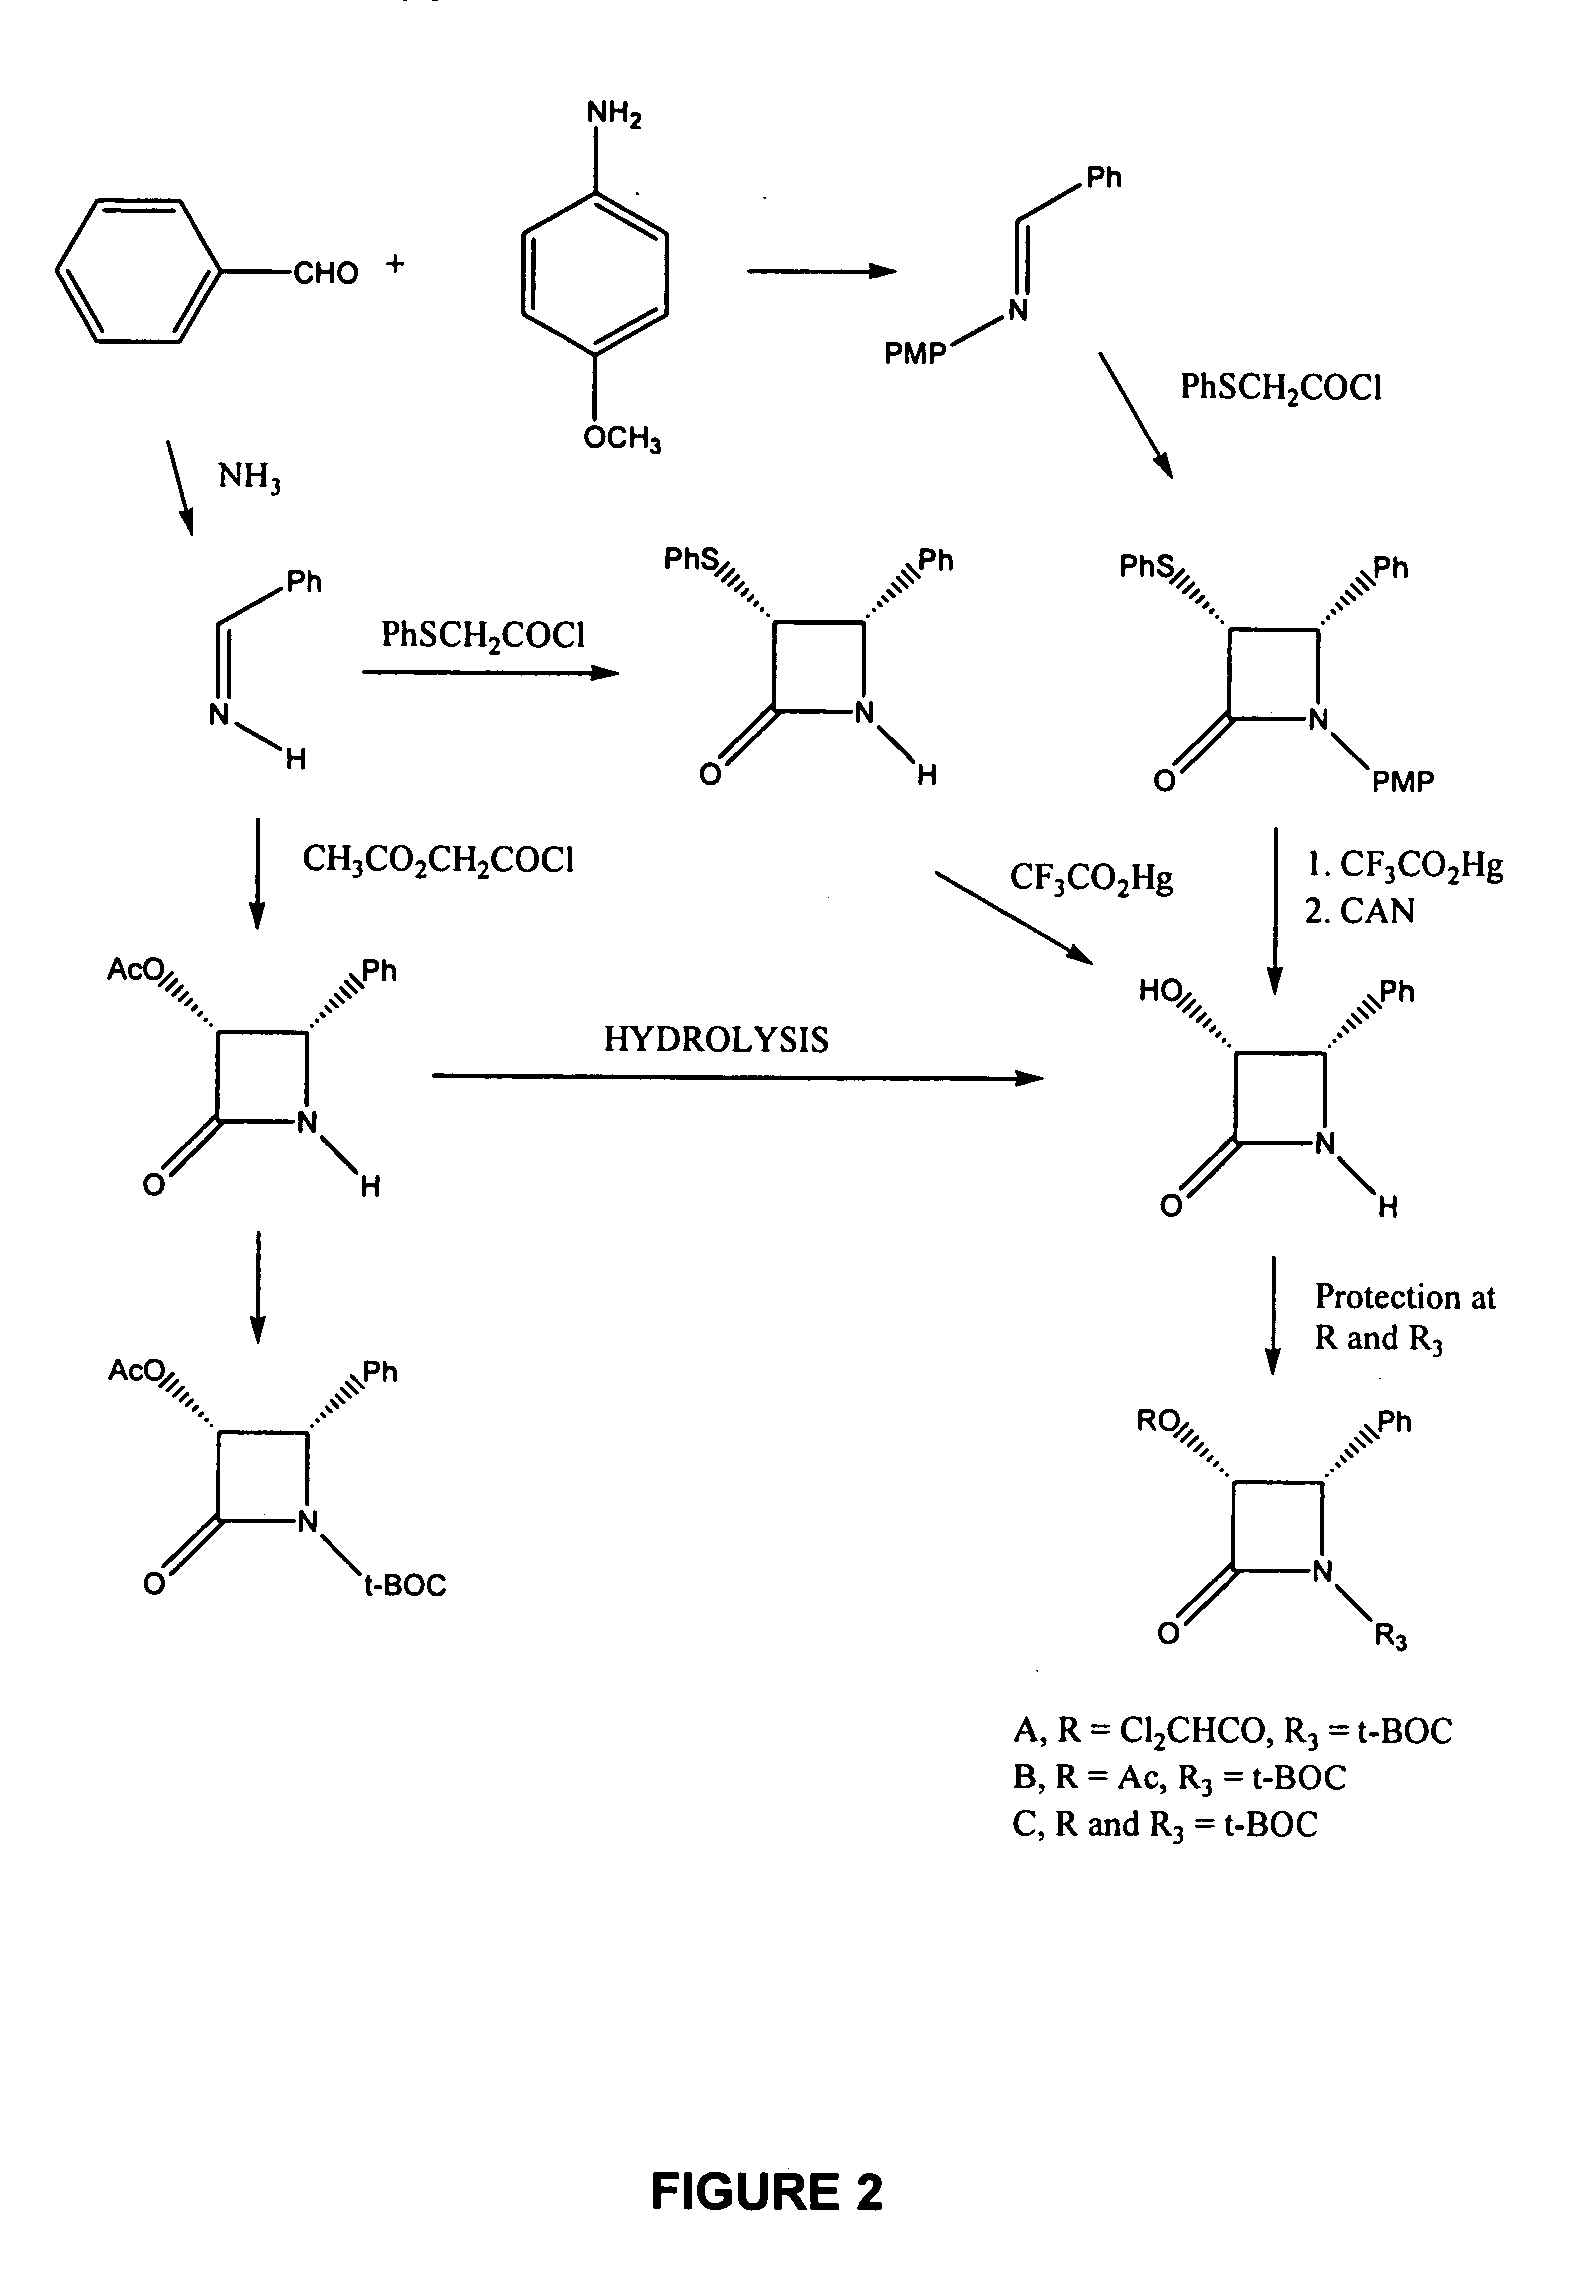 One pot synthesis of taxane derivatives and their conversion to paclitaxel and docetaxel